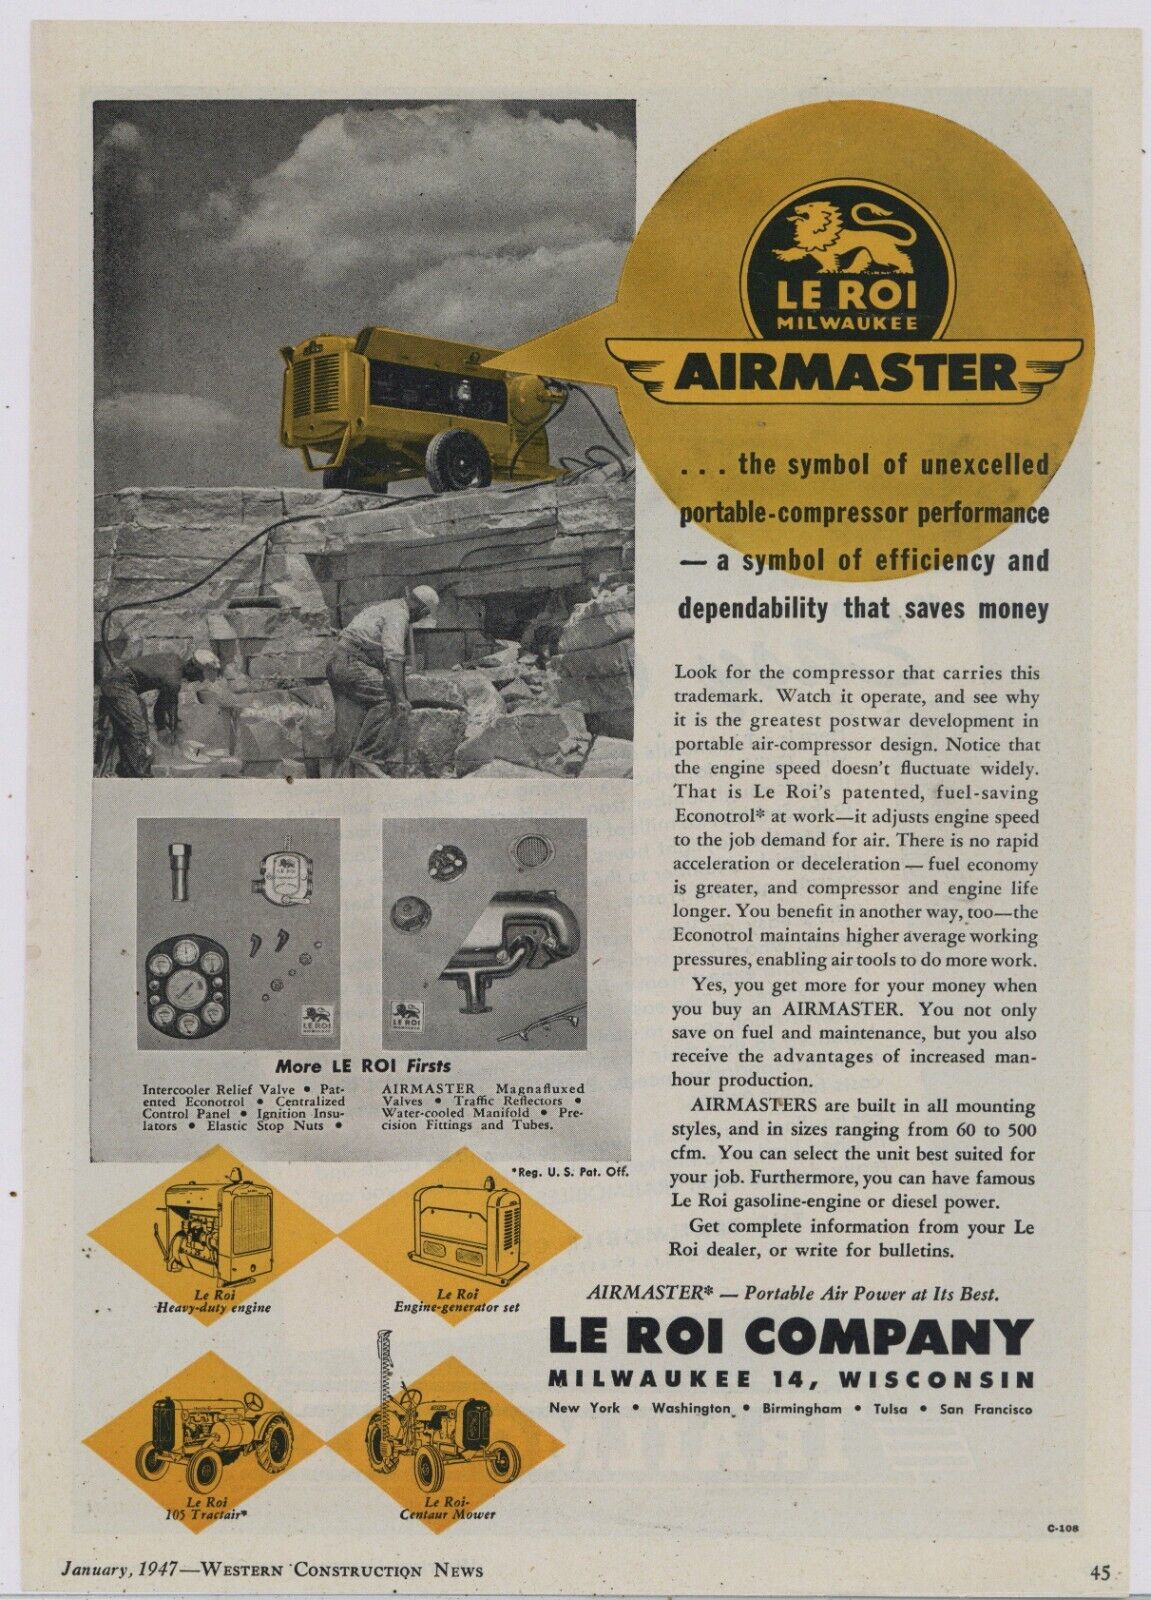 1947 Le Roi Co. Ad: Airmaster Portable Air Compressor - Milwaukee, Wisconsin